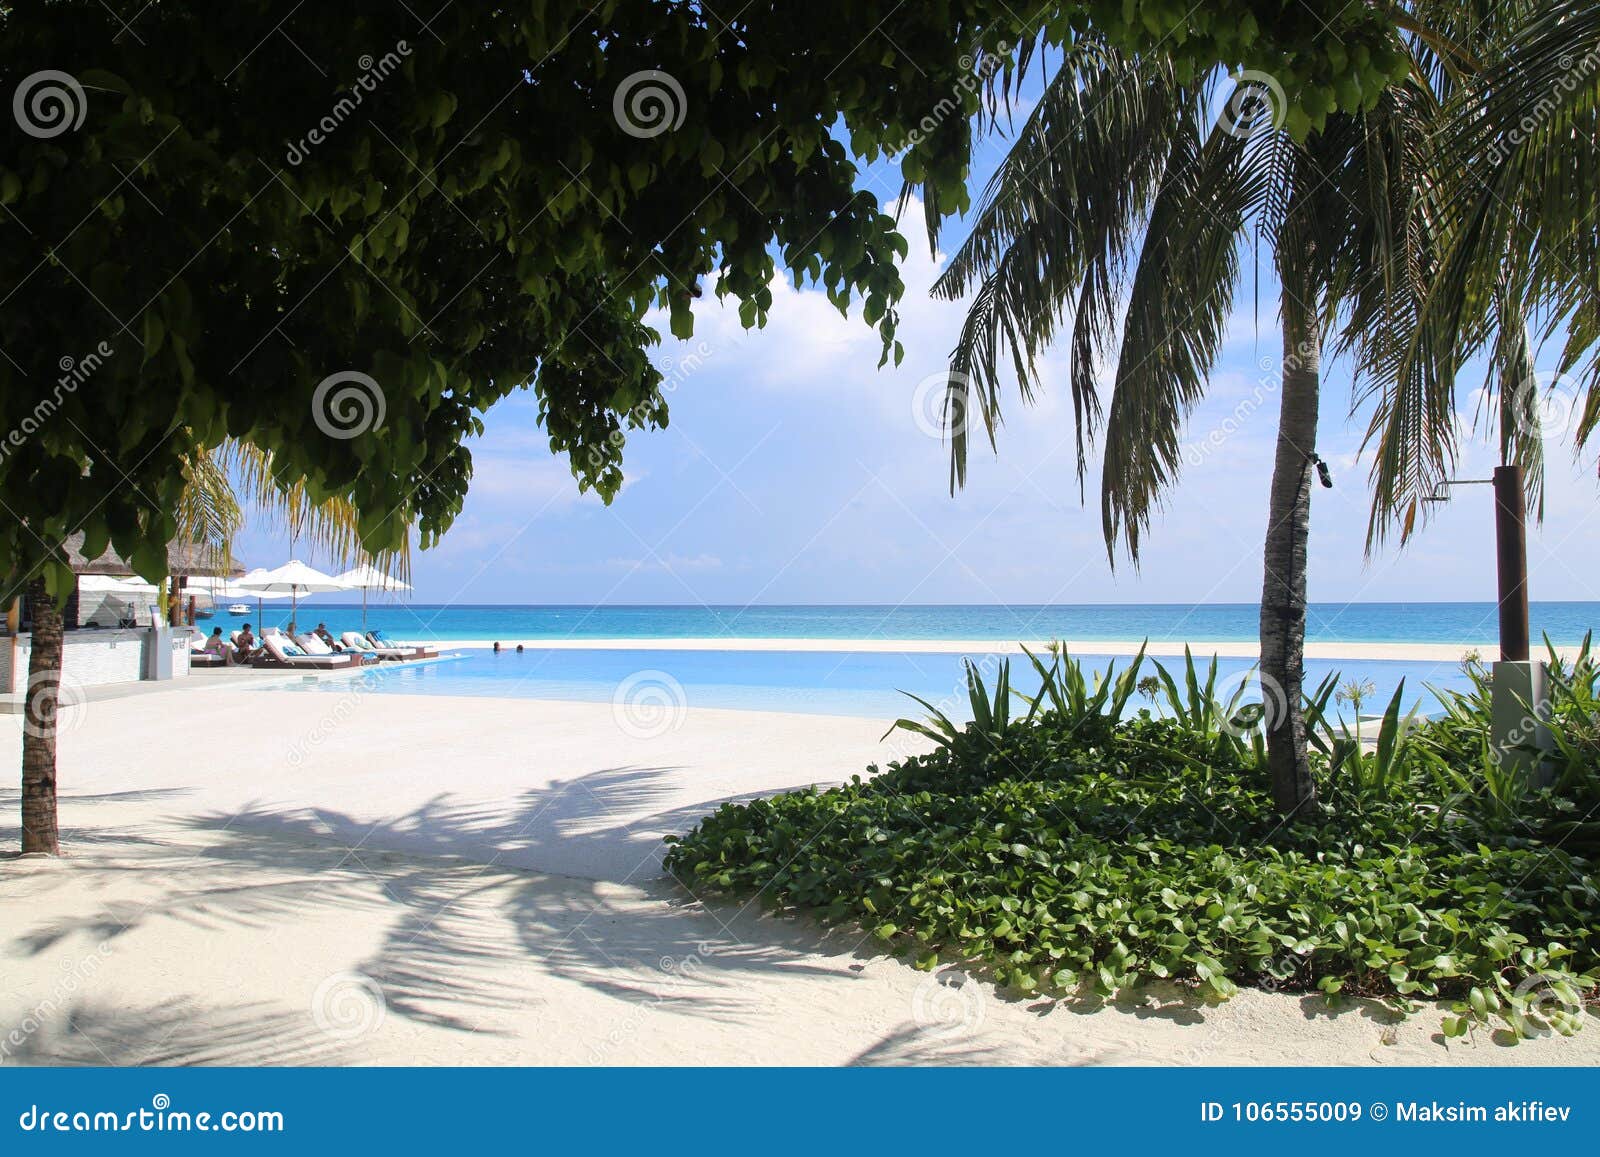 Panorama Of The Pool In The Maldive Islands Editorial Stock Image